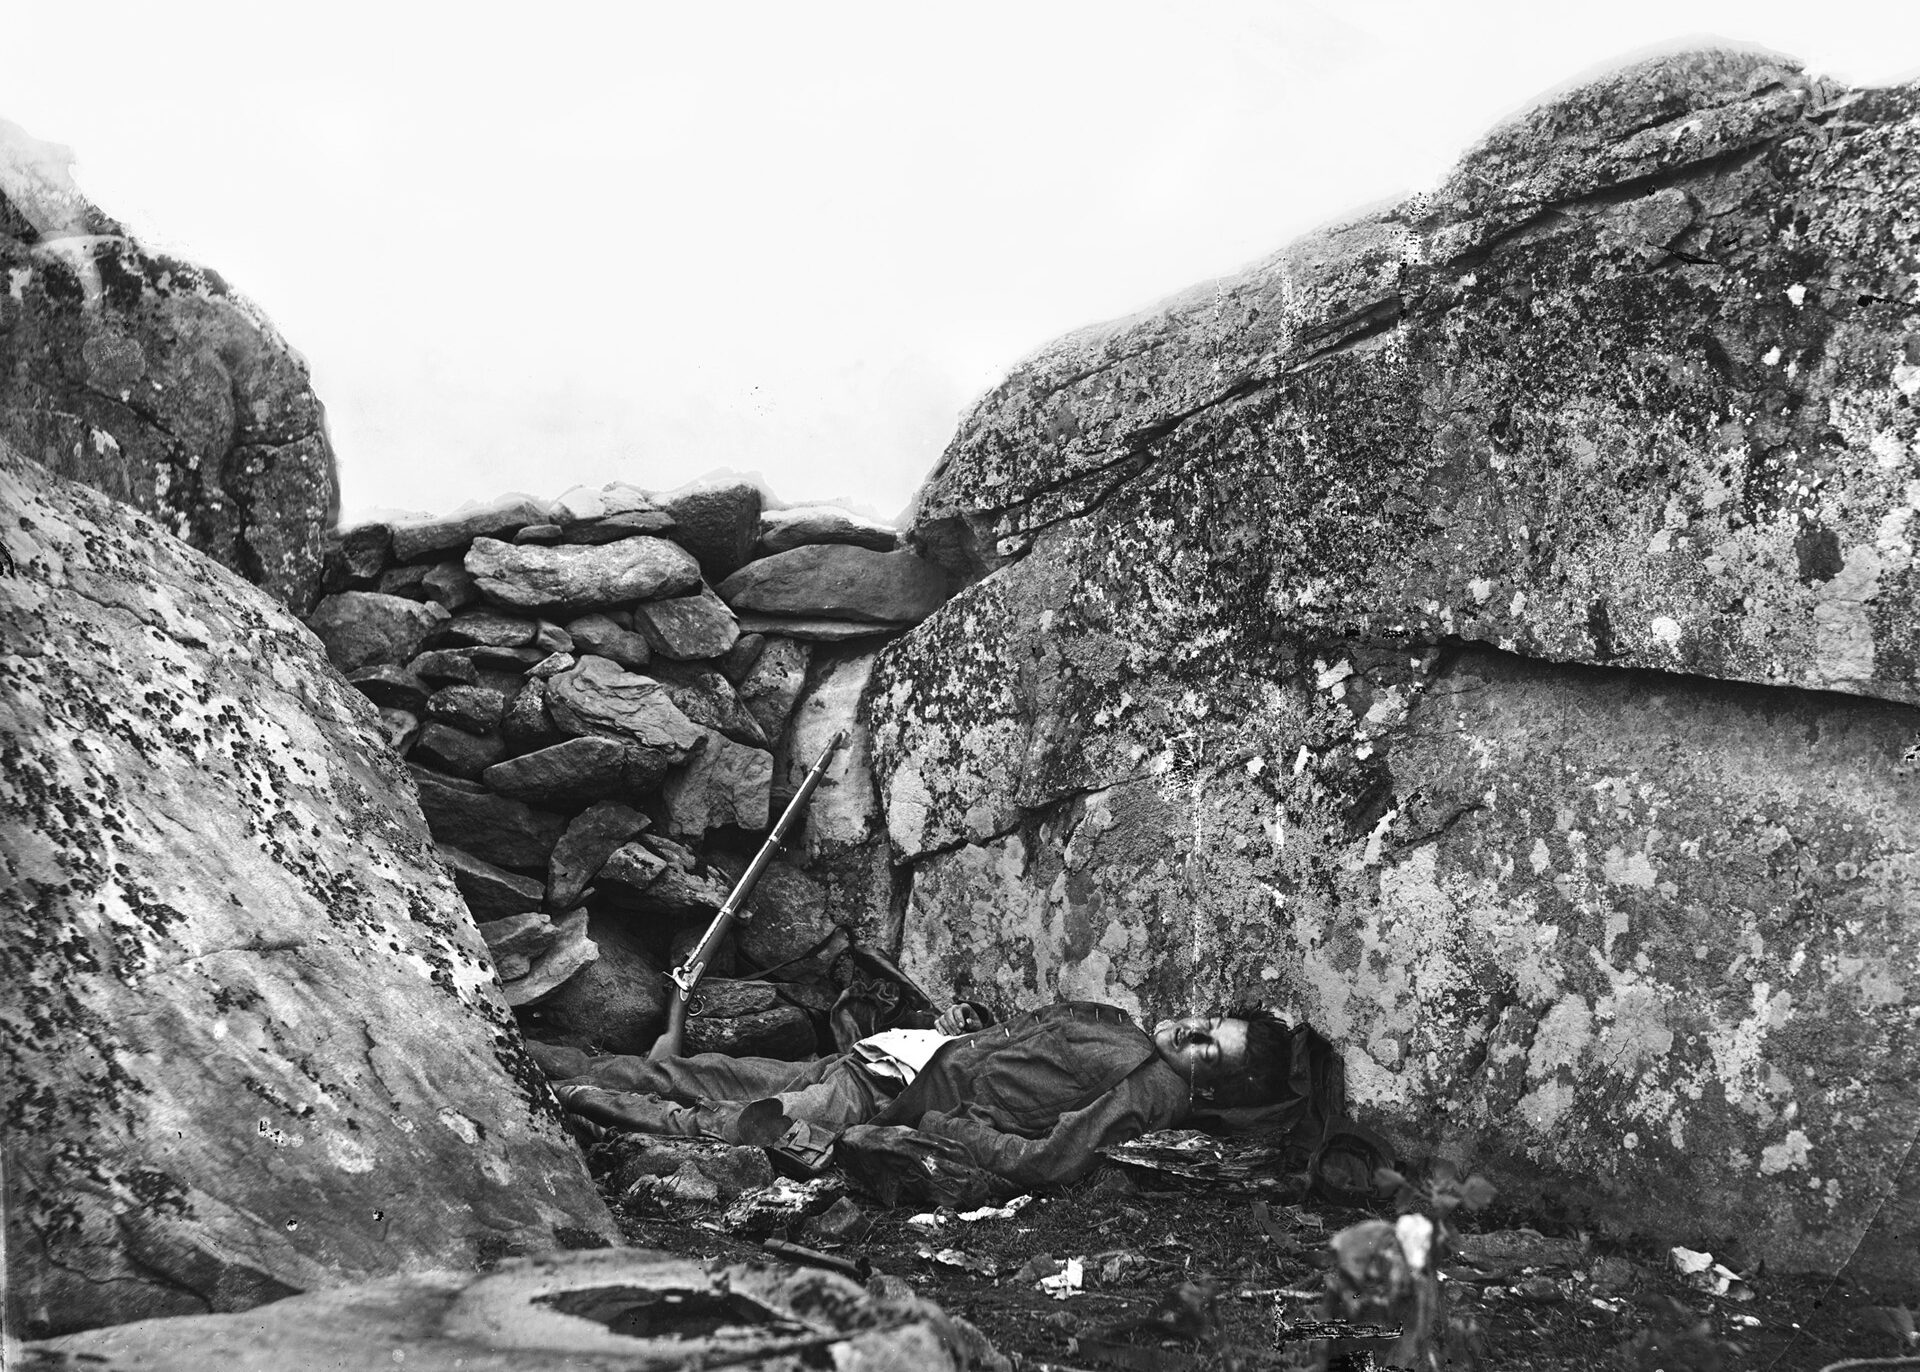 Photographers Gardner and O’Sullivan repositioned a dead Confederate soldier, a rifle, and a knapsack to create the tableau of an alleged “sharpshooter” at Gettysburg’s Devil’s Den.